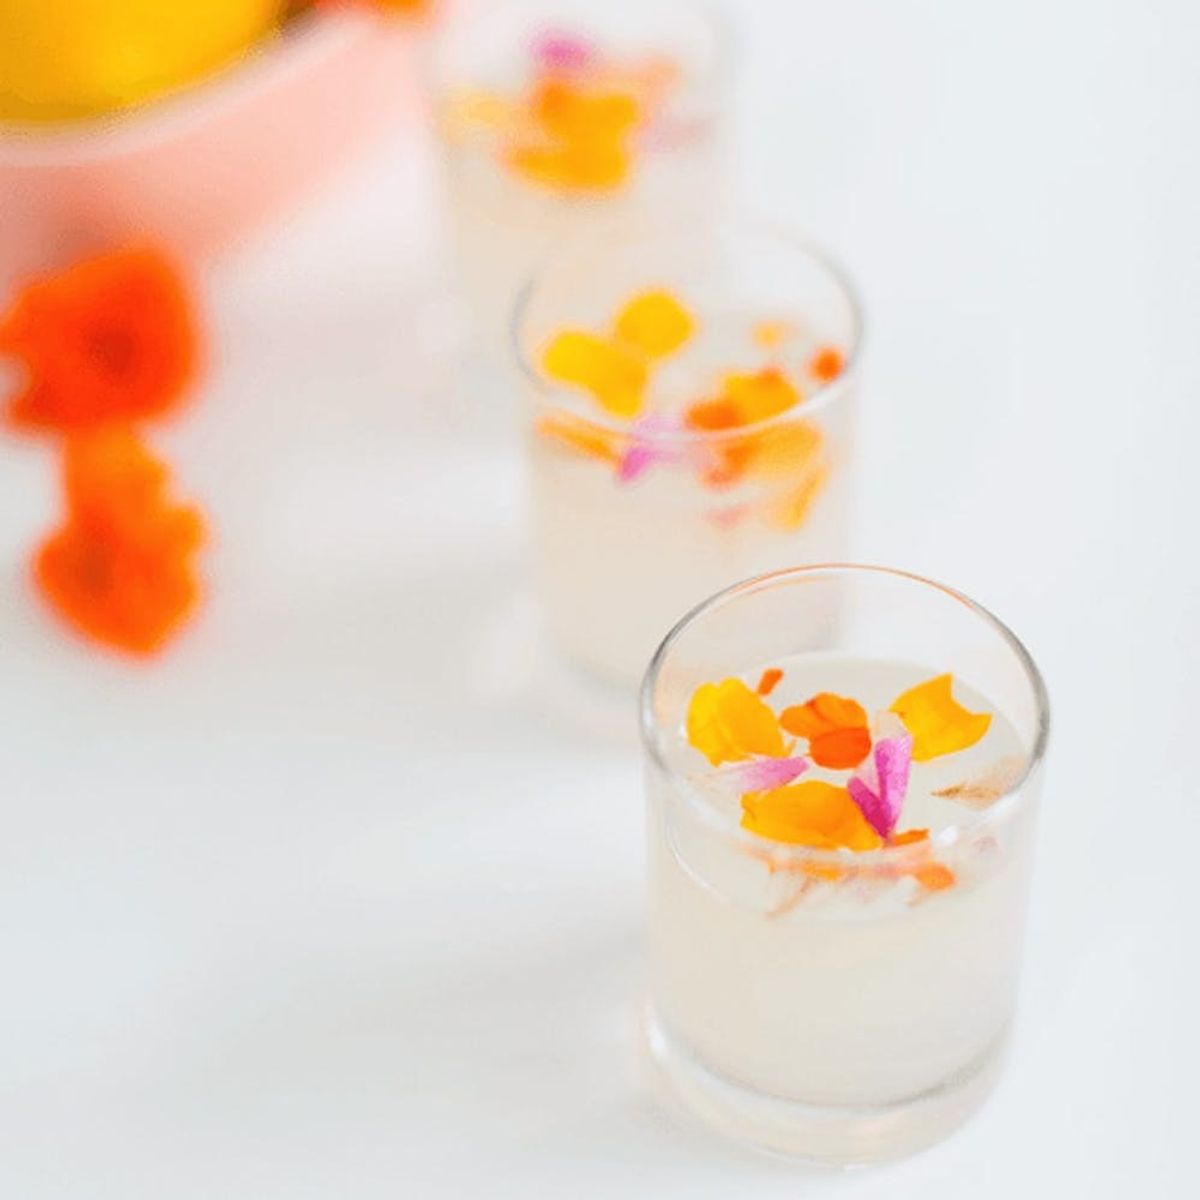 17 Floral Cocktails That Are *Almost* Too Pretty to Drink